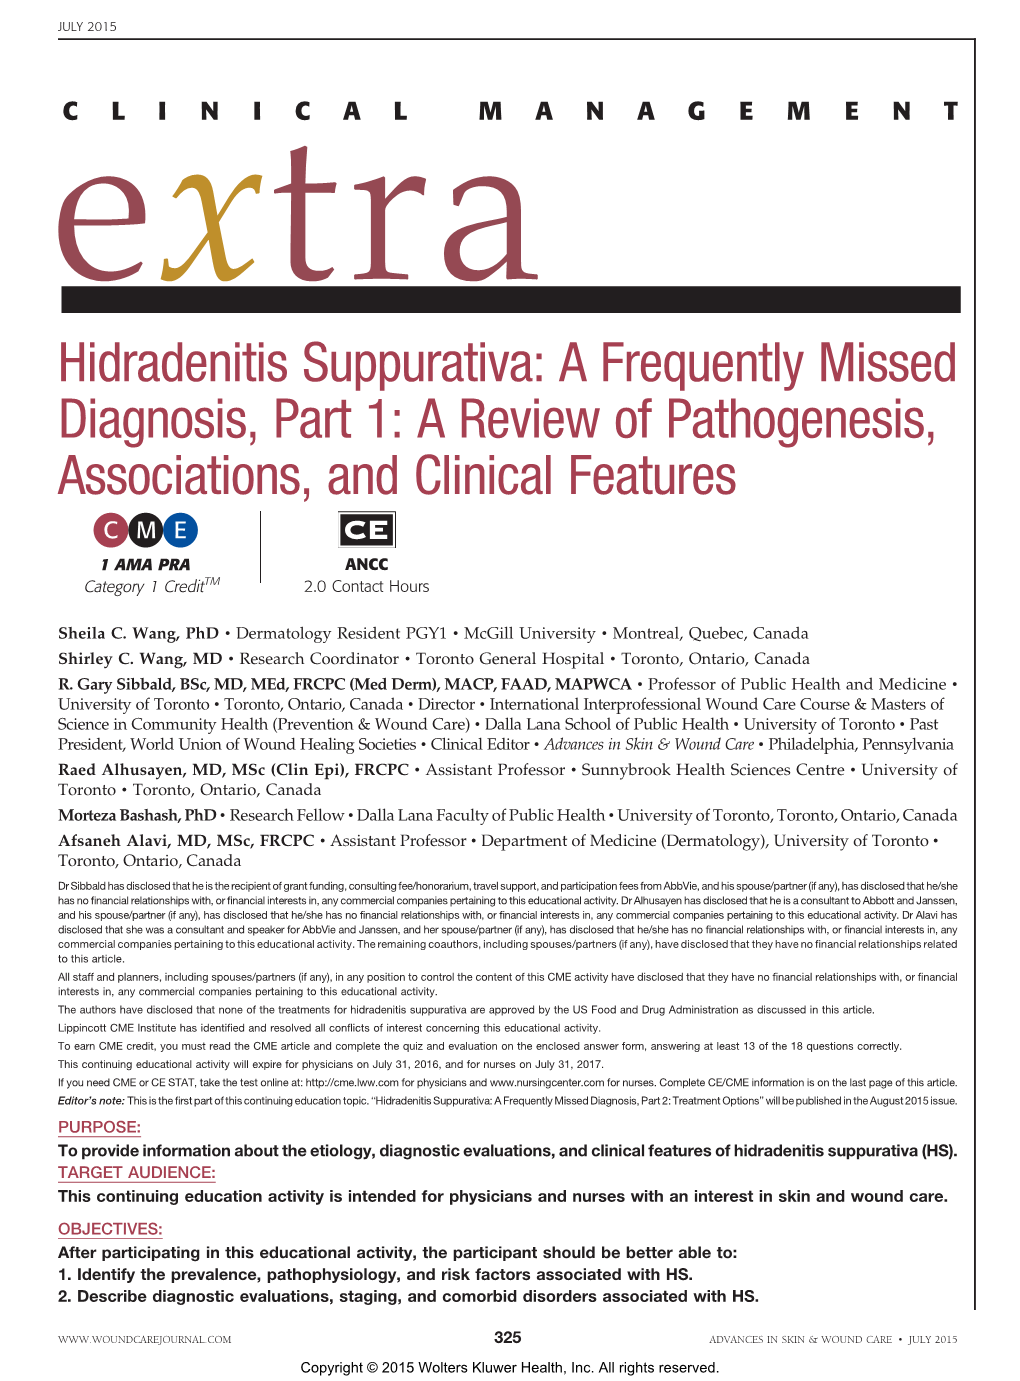 Hidradenitis Suppurativa: a Frequently Missed Diagnosis, Part 1